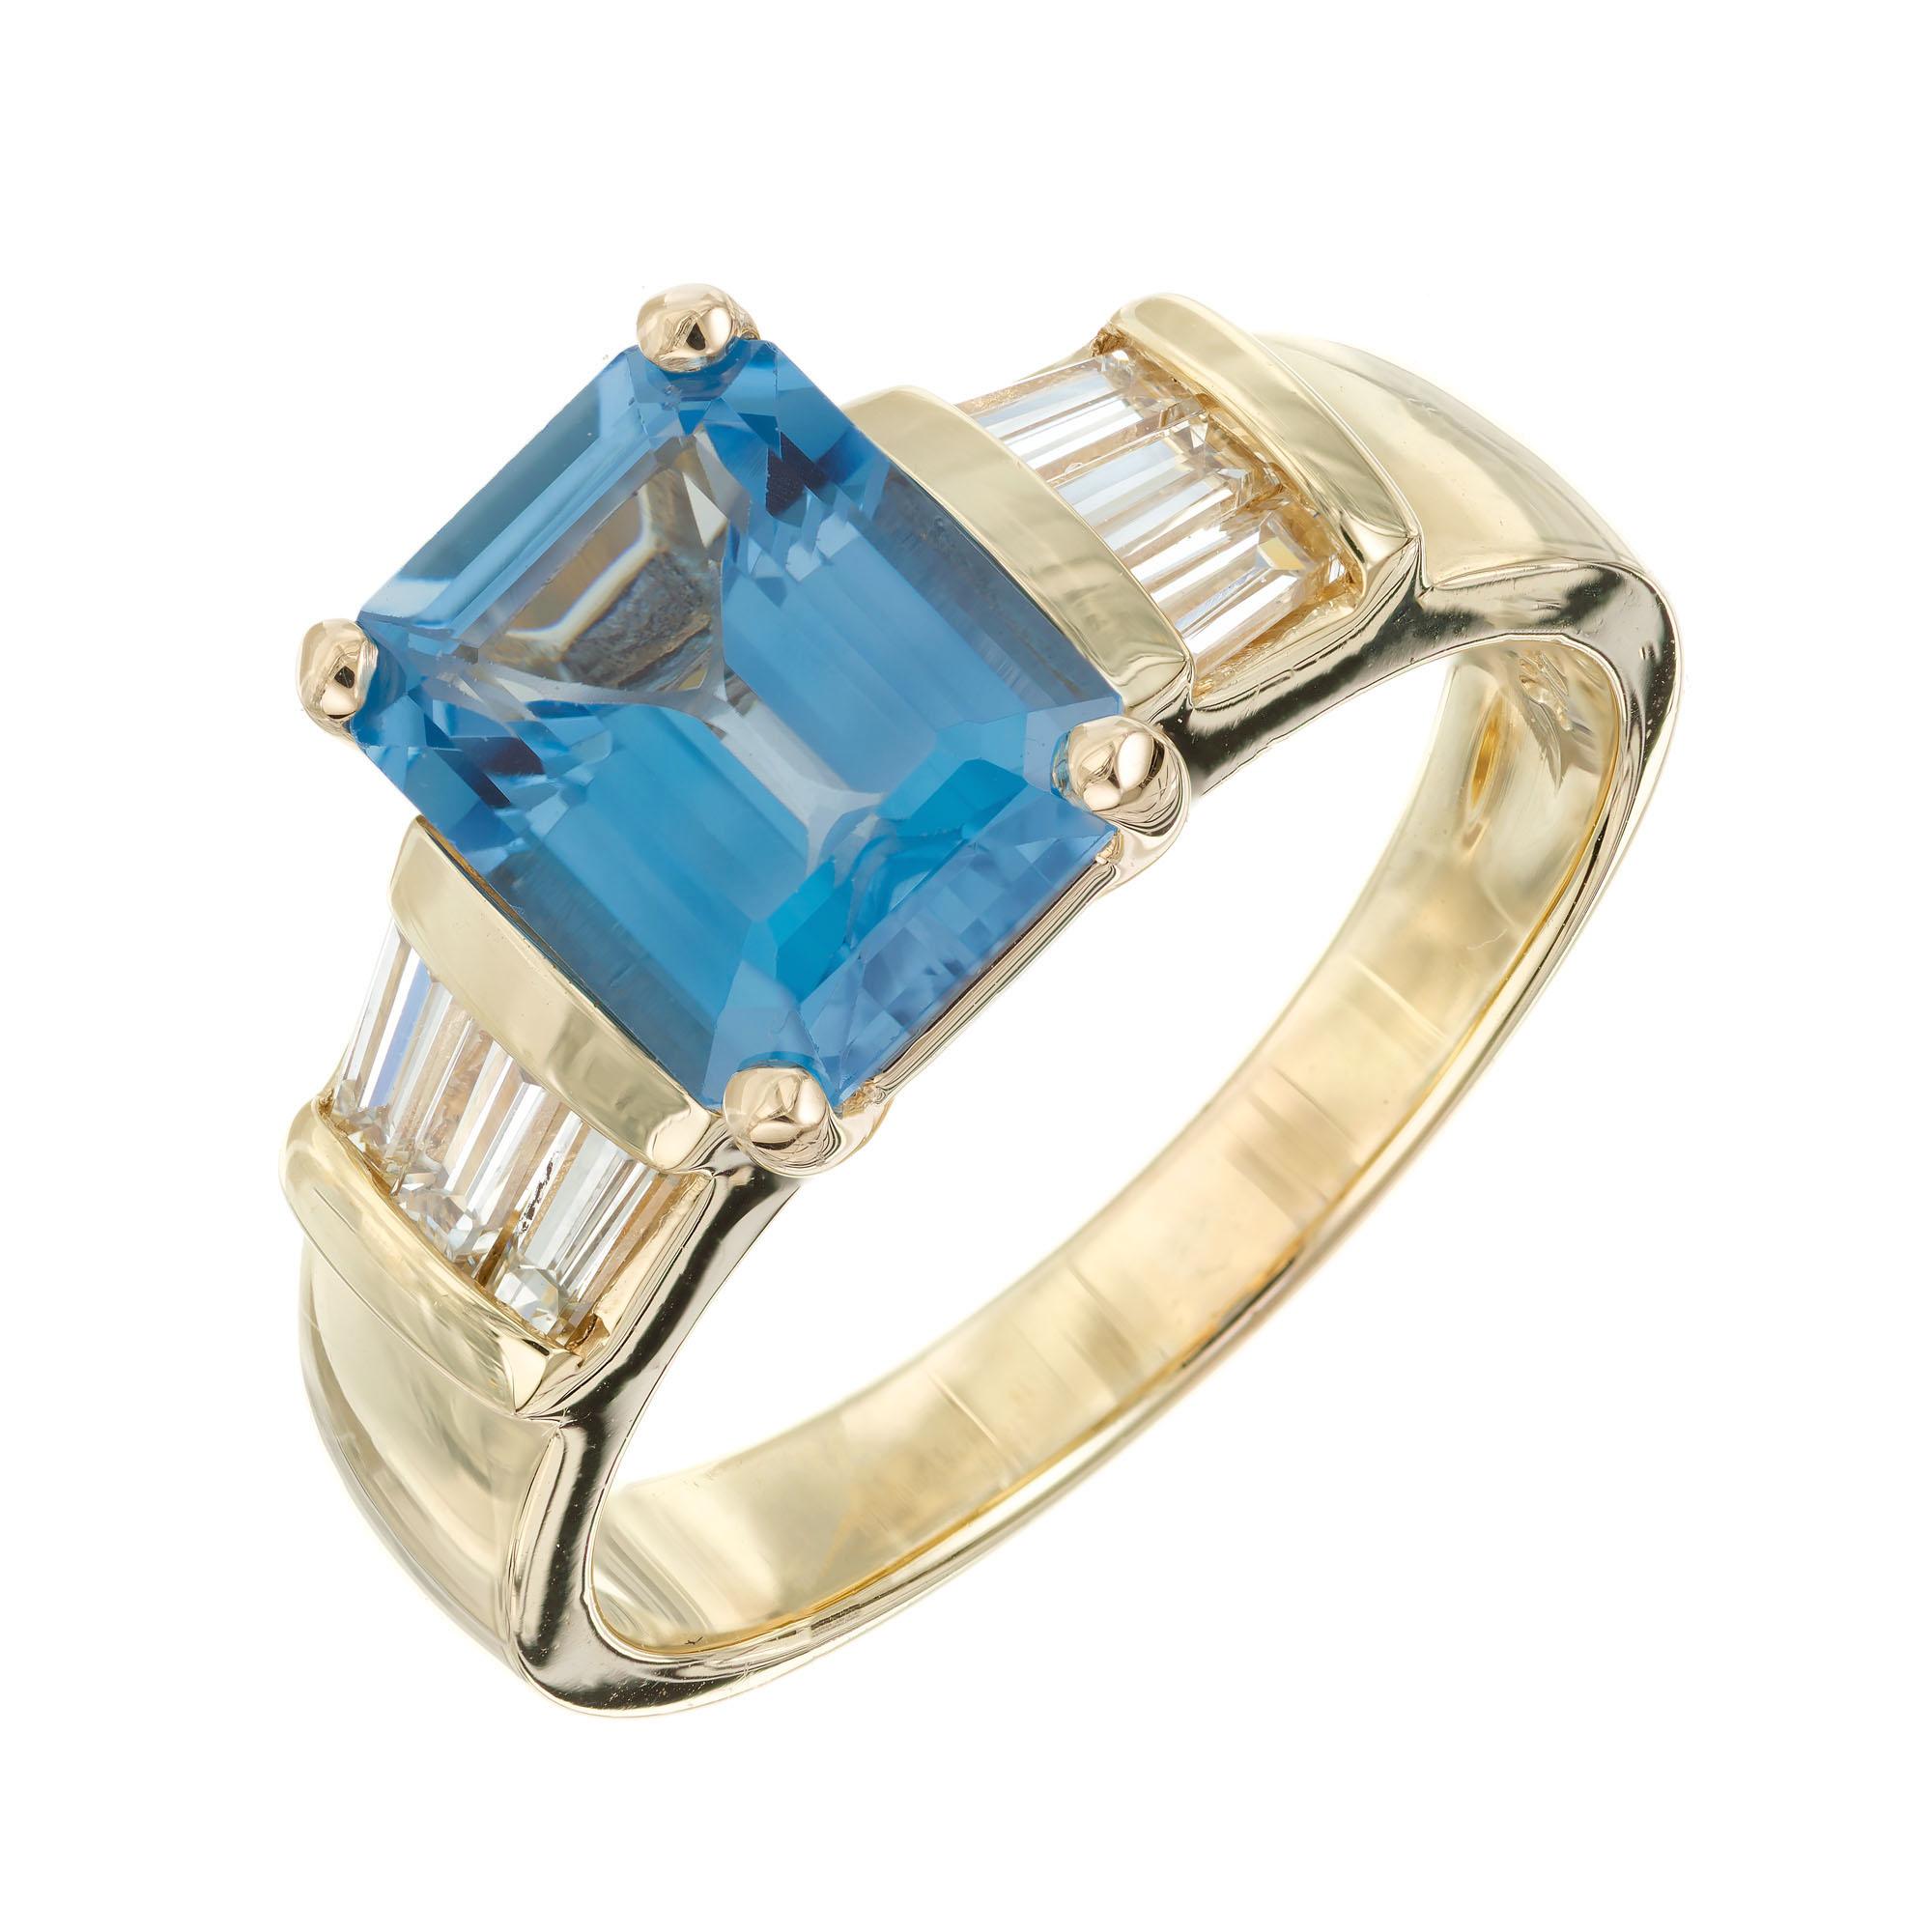 Topaz and diamond right. Bright blue emerald cut 2.50 carat topaz center stone set in a 14k yellow gold setting accented with tapered baguette diamonds.

1 rectangular blue topaz, VS approx. 2.58cts
6 tapered baguettes, H VS approx. .40cts
Size 7